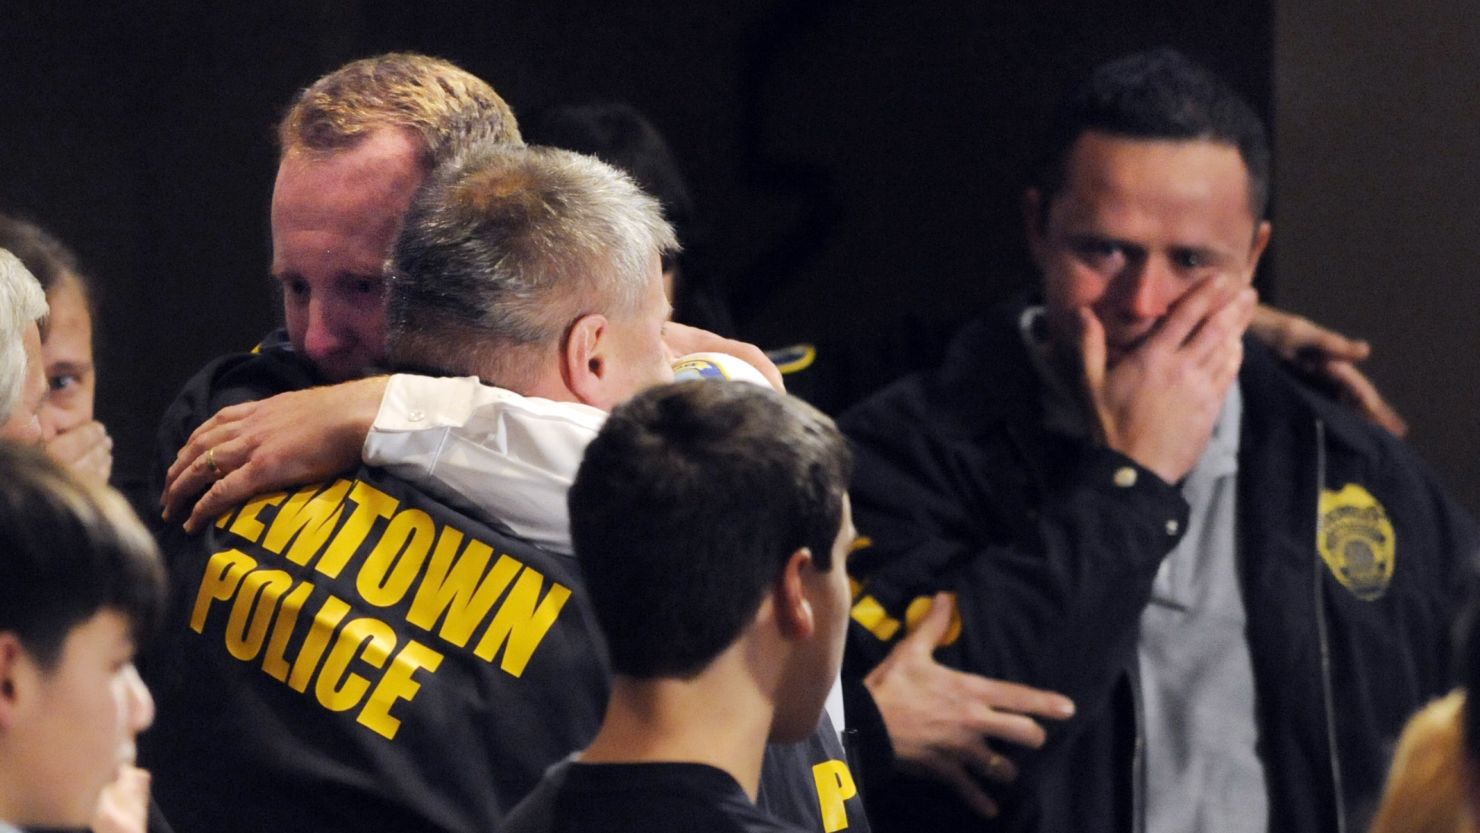 Newtown, Connecticut, first responders received an emotional standing ovation at a vigil for the school shooting victims on December 16.